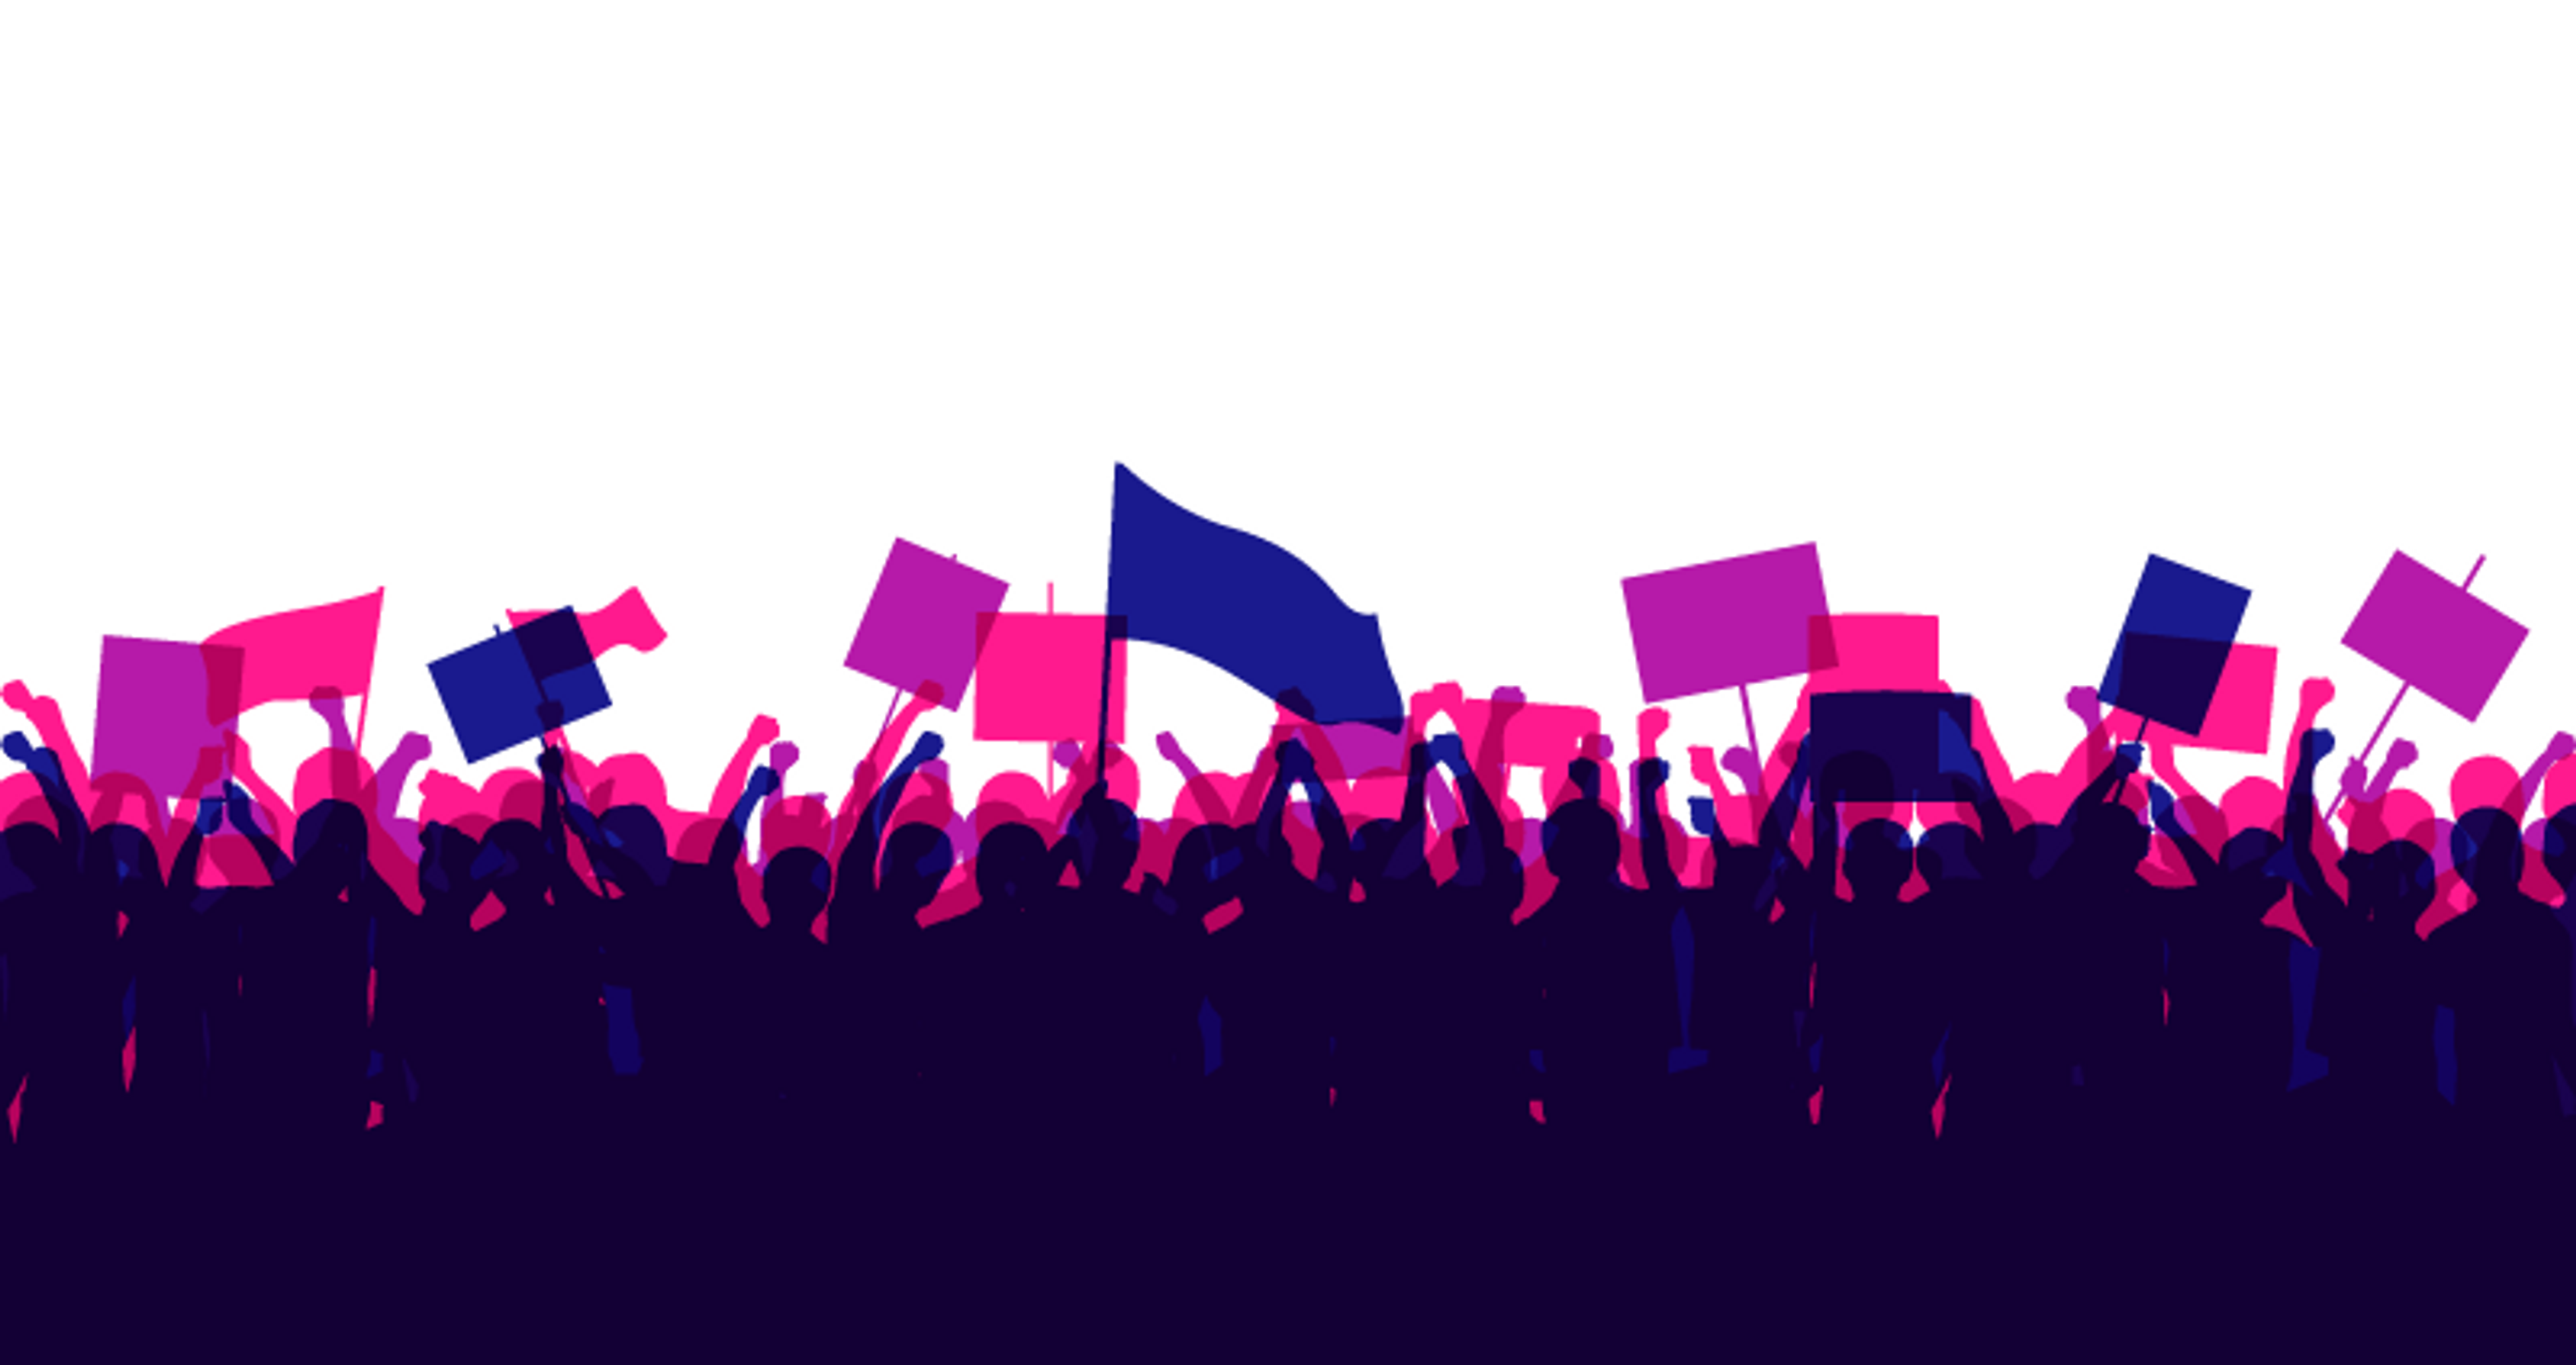 An illustration of a crowd of protestors in silhouette 